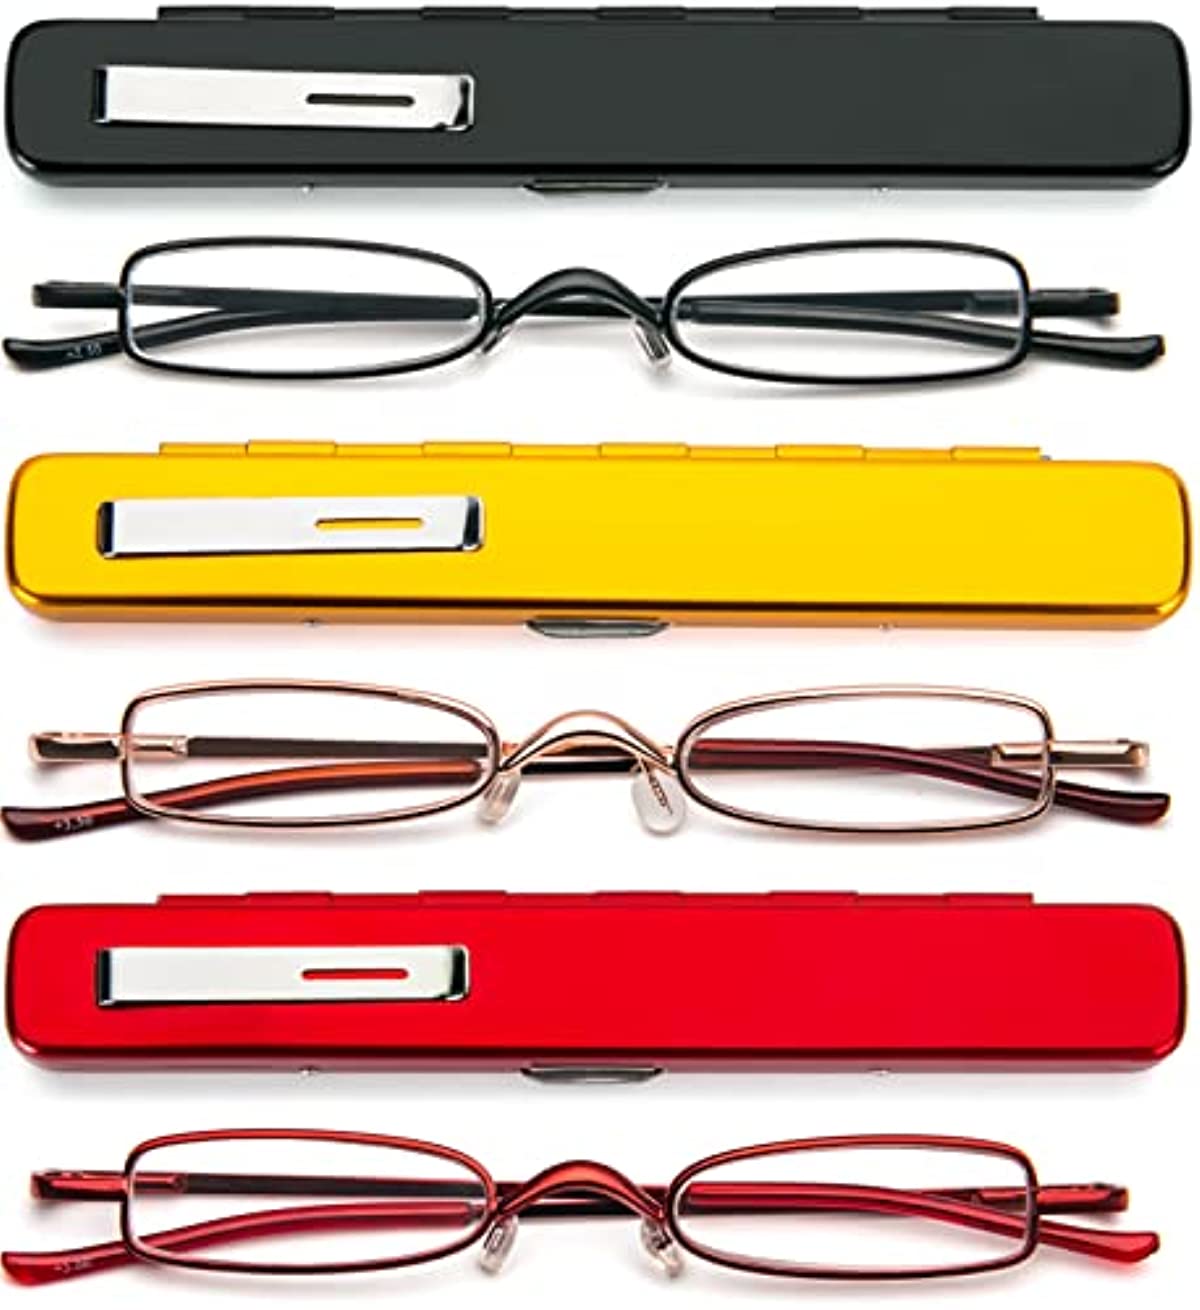 REAVEE 3 Pack Pocket Small Reading Glasses for Women Men Metal Ultra Slim Portable Readers with Pen Clip Case Spring Hinge, Black Red Gold +1.5